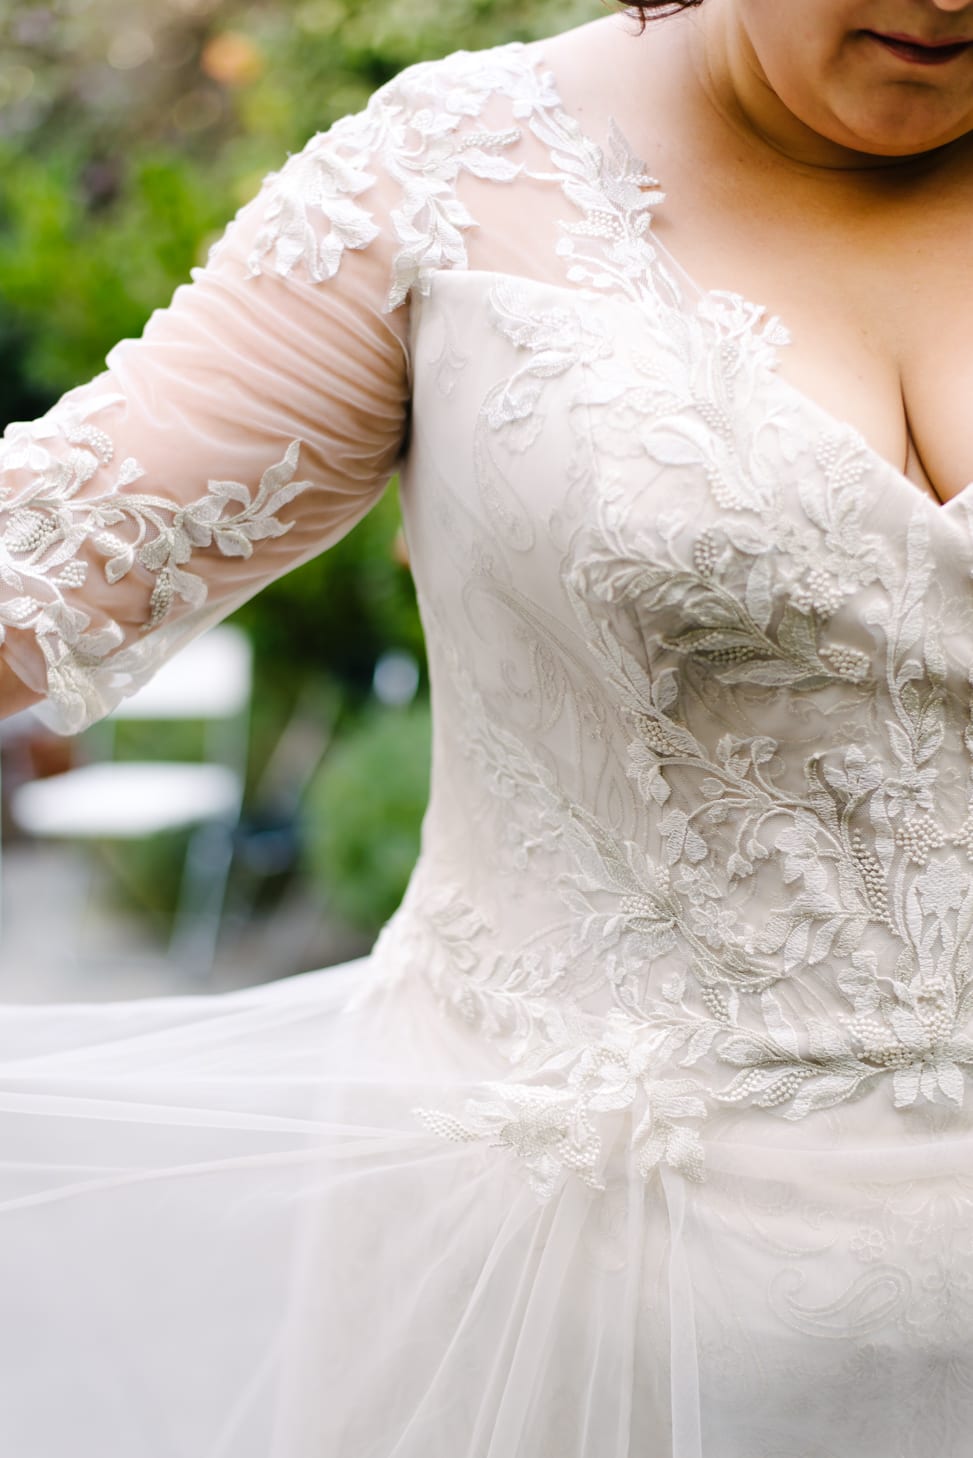 close up photo of plus size wedding dress sleeve floral lace details from Lace and Liberty